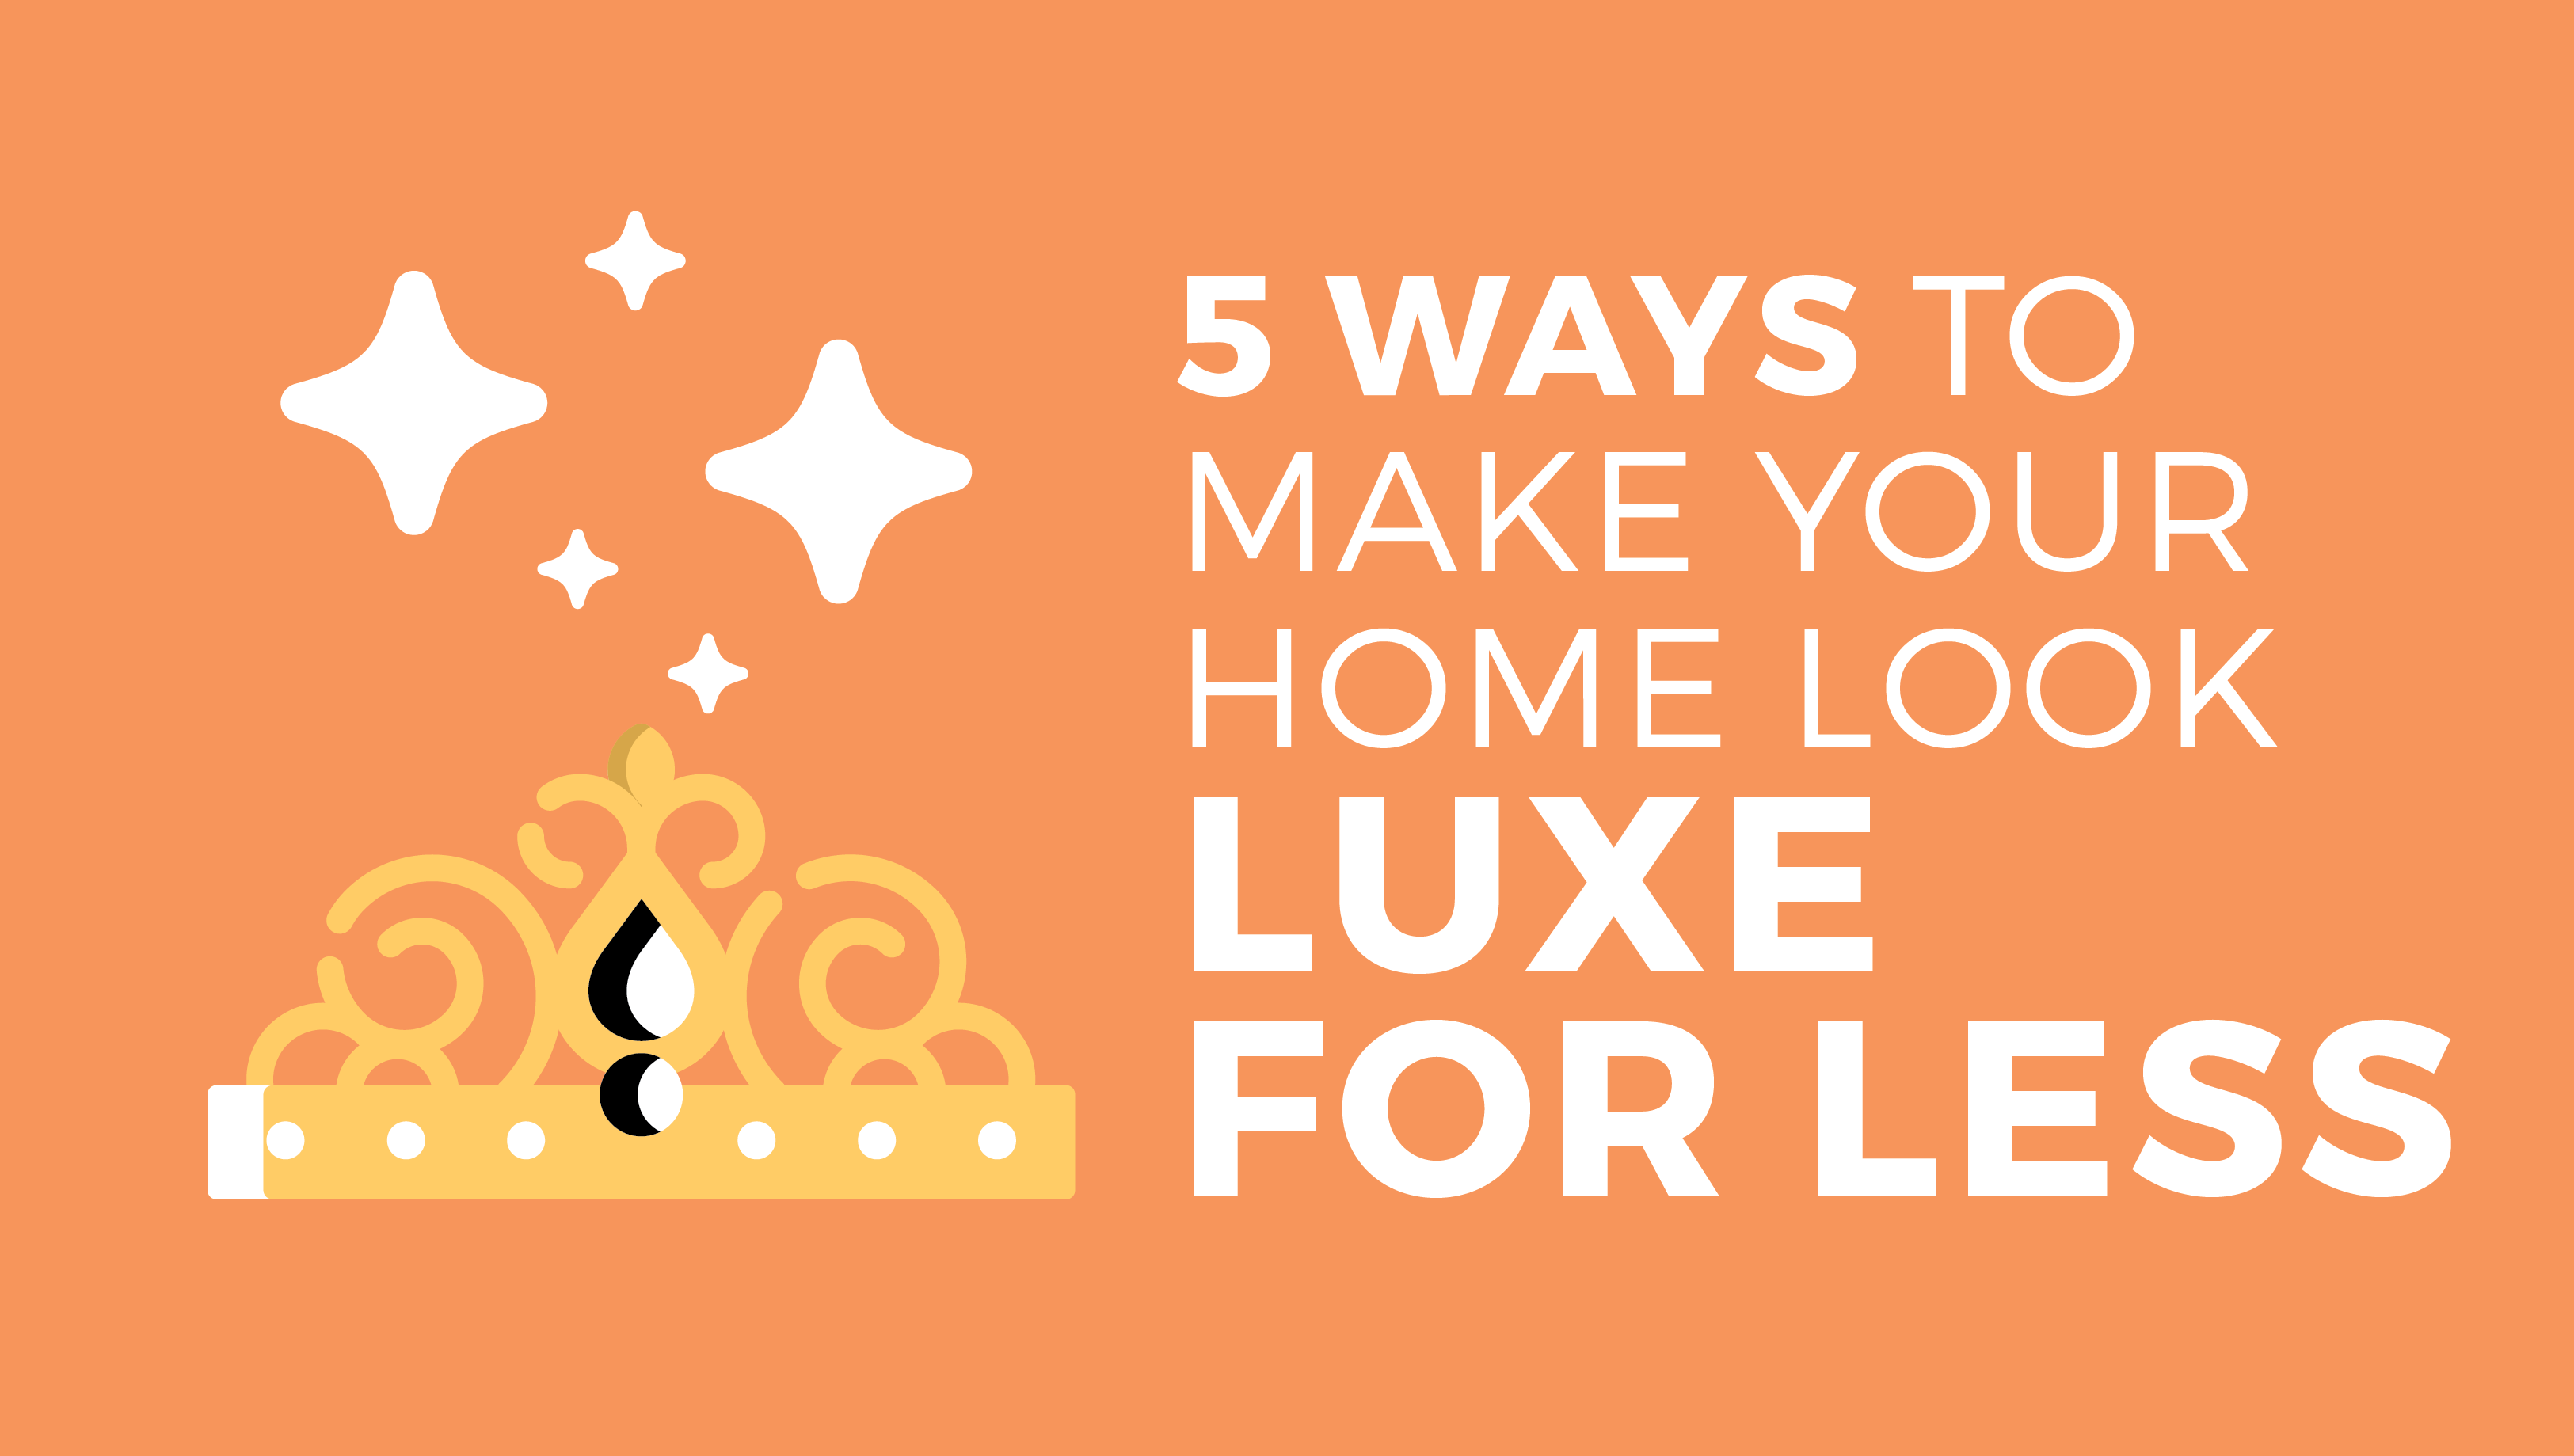 5 ways to make your home look luxe for less